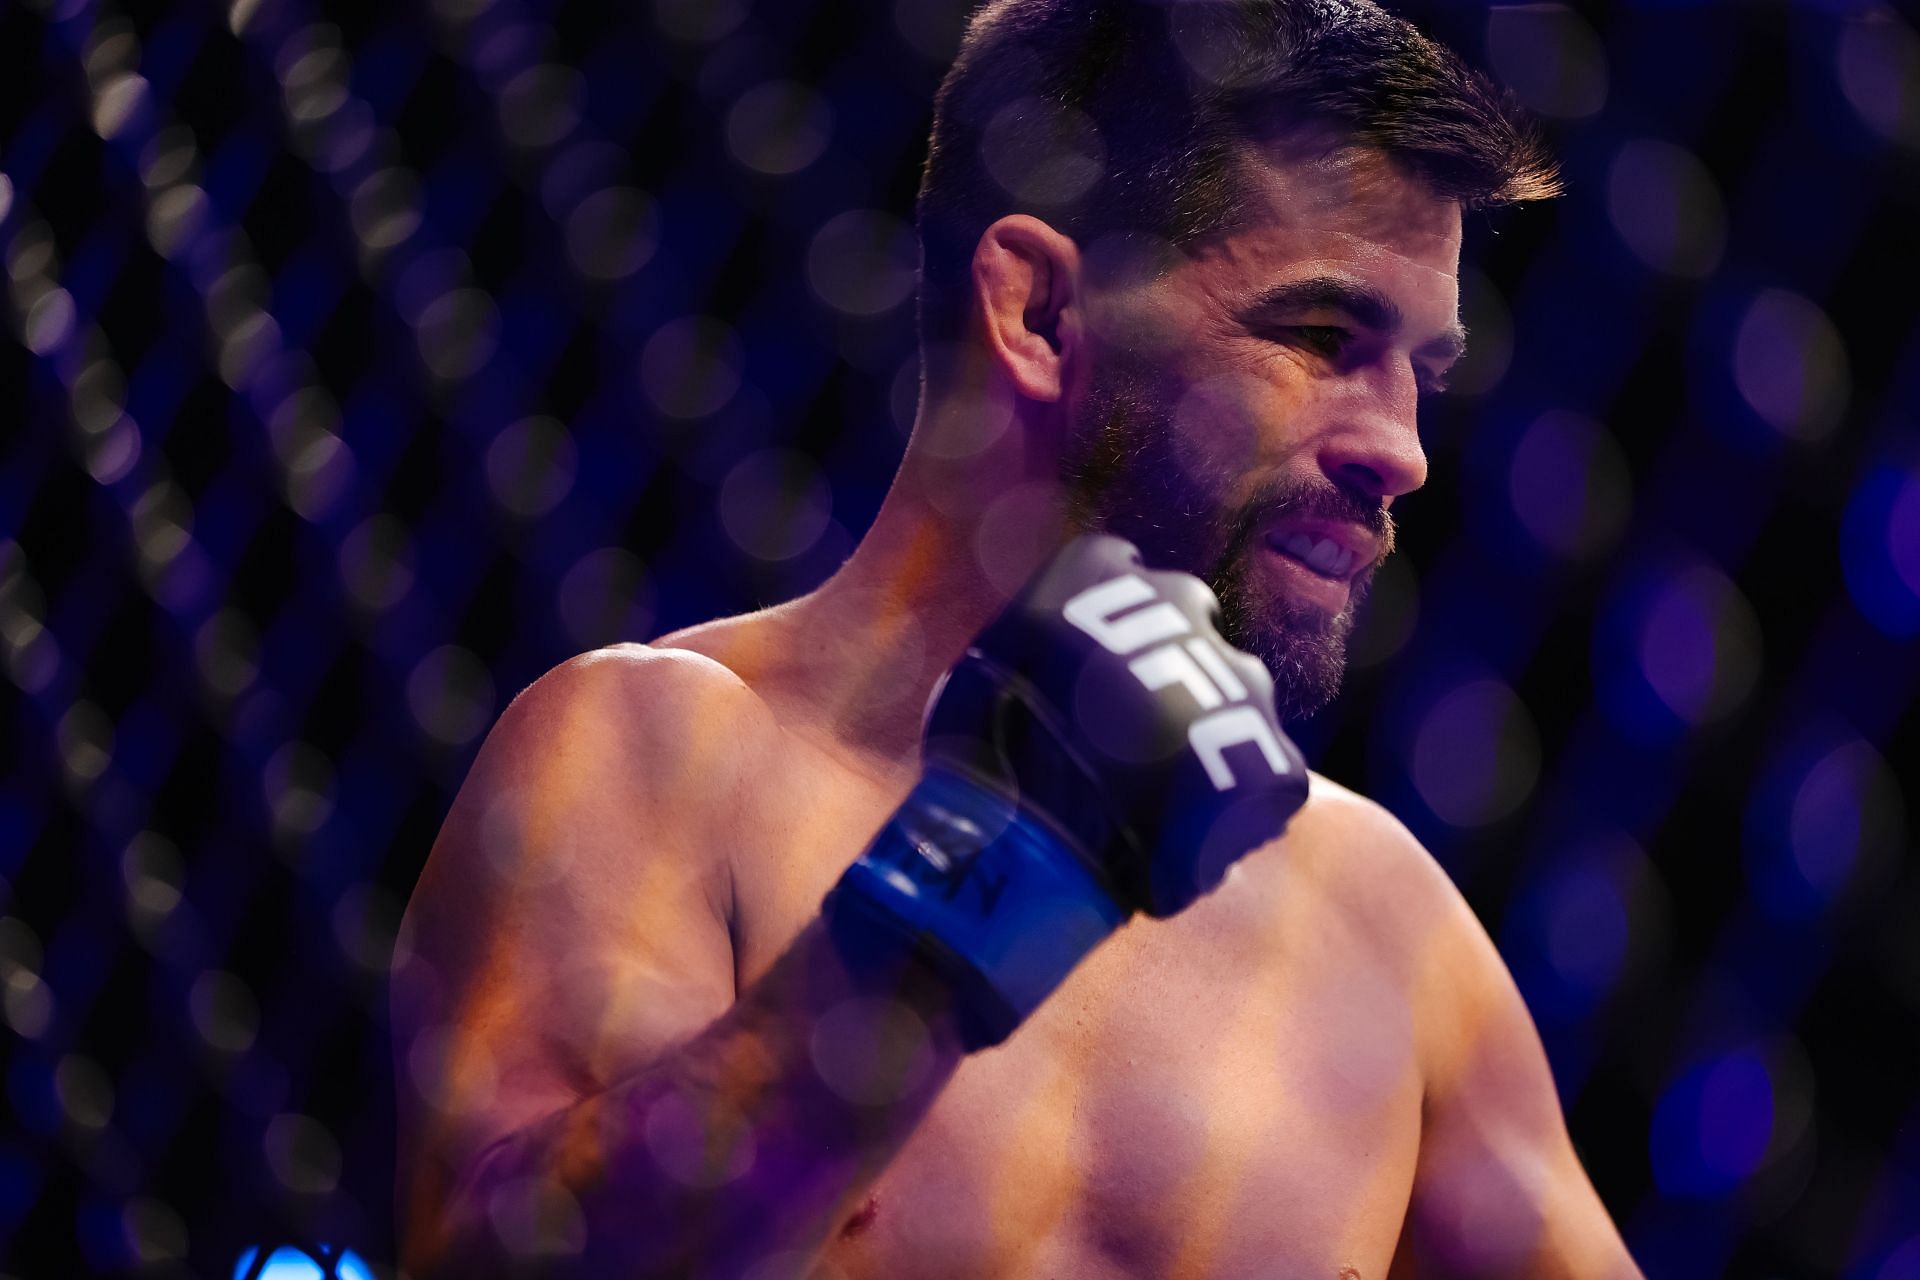 Could former champ Dominick Cruz provide a tricky test for Yan?